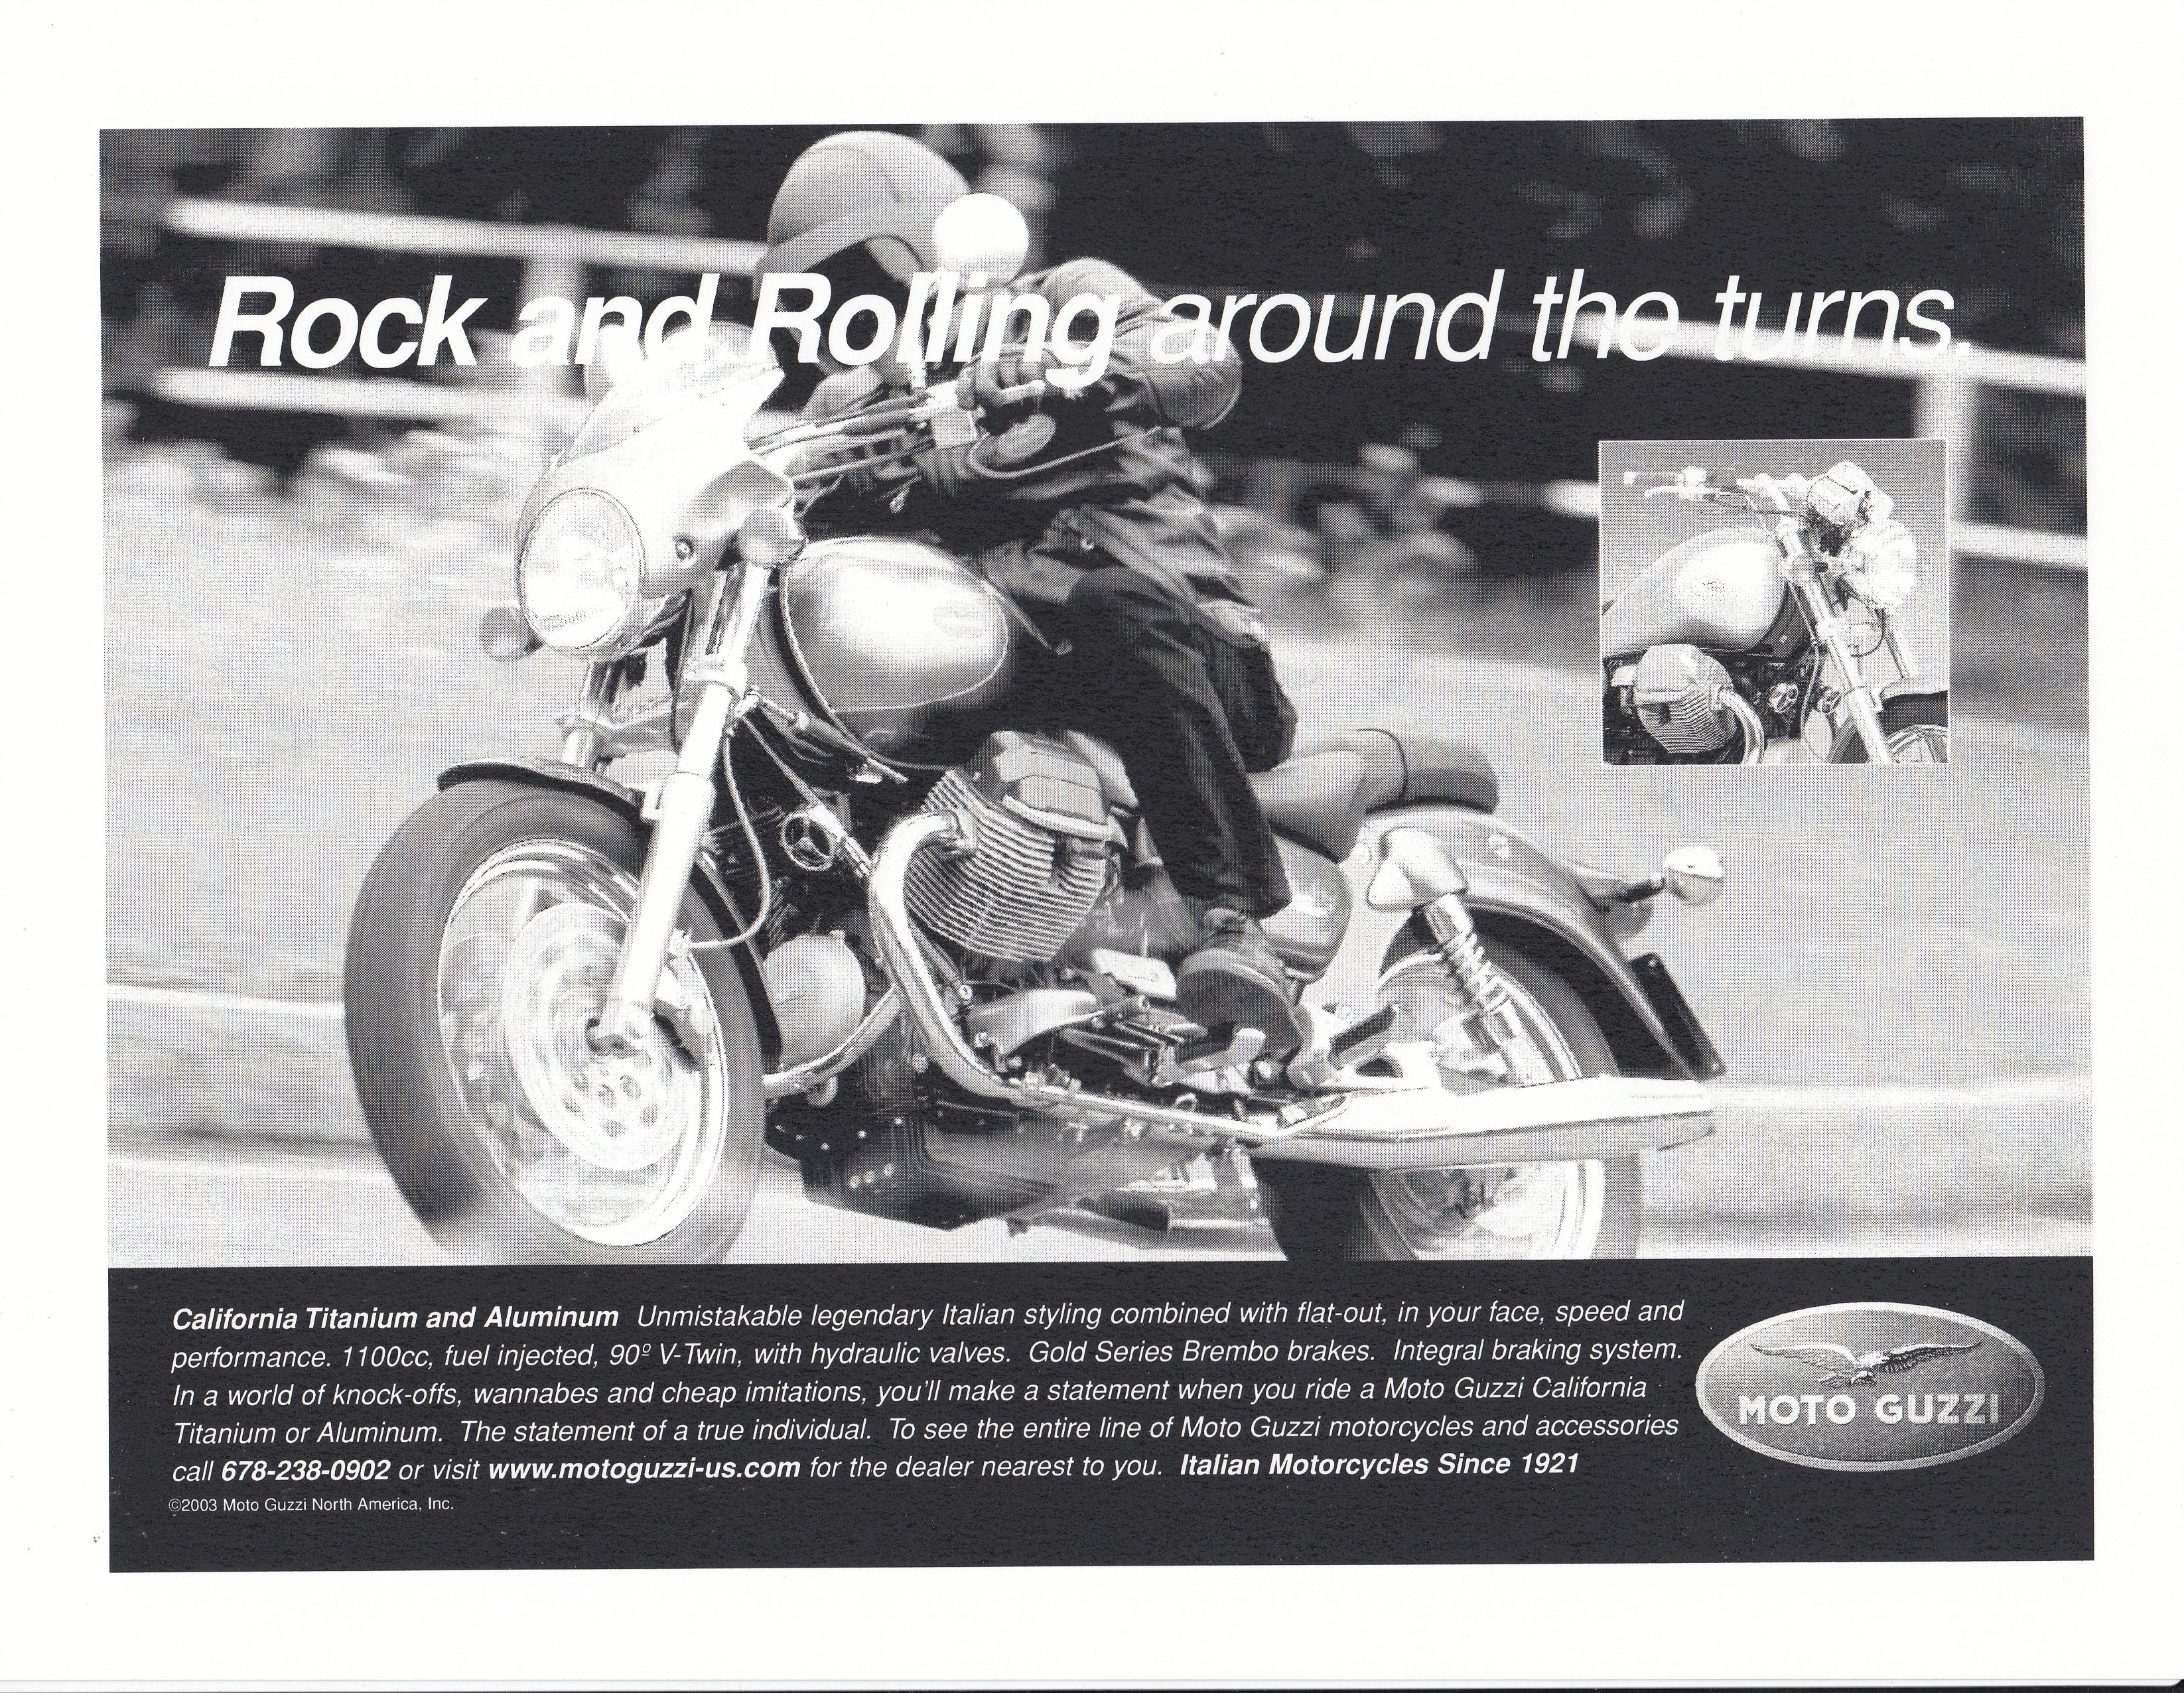 Press release - Rock and rolling around the turns (2003)